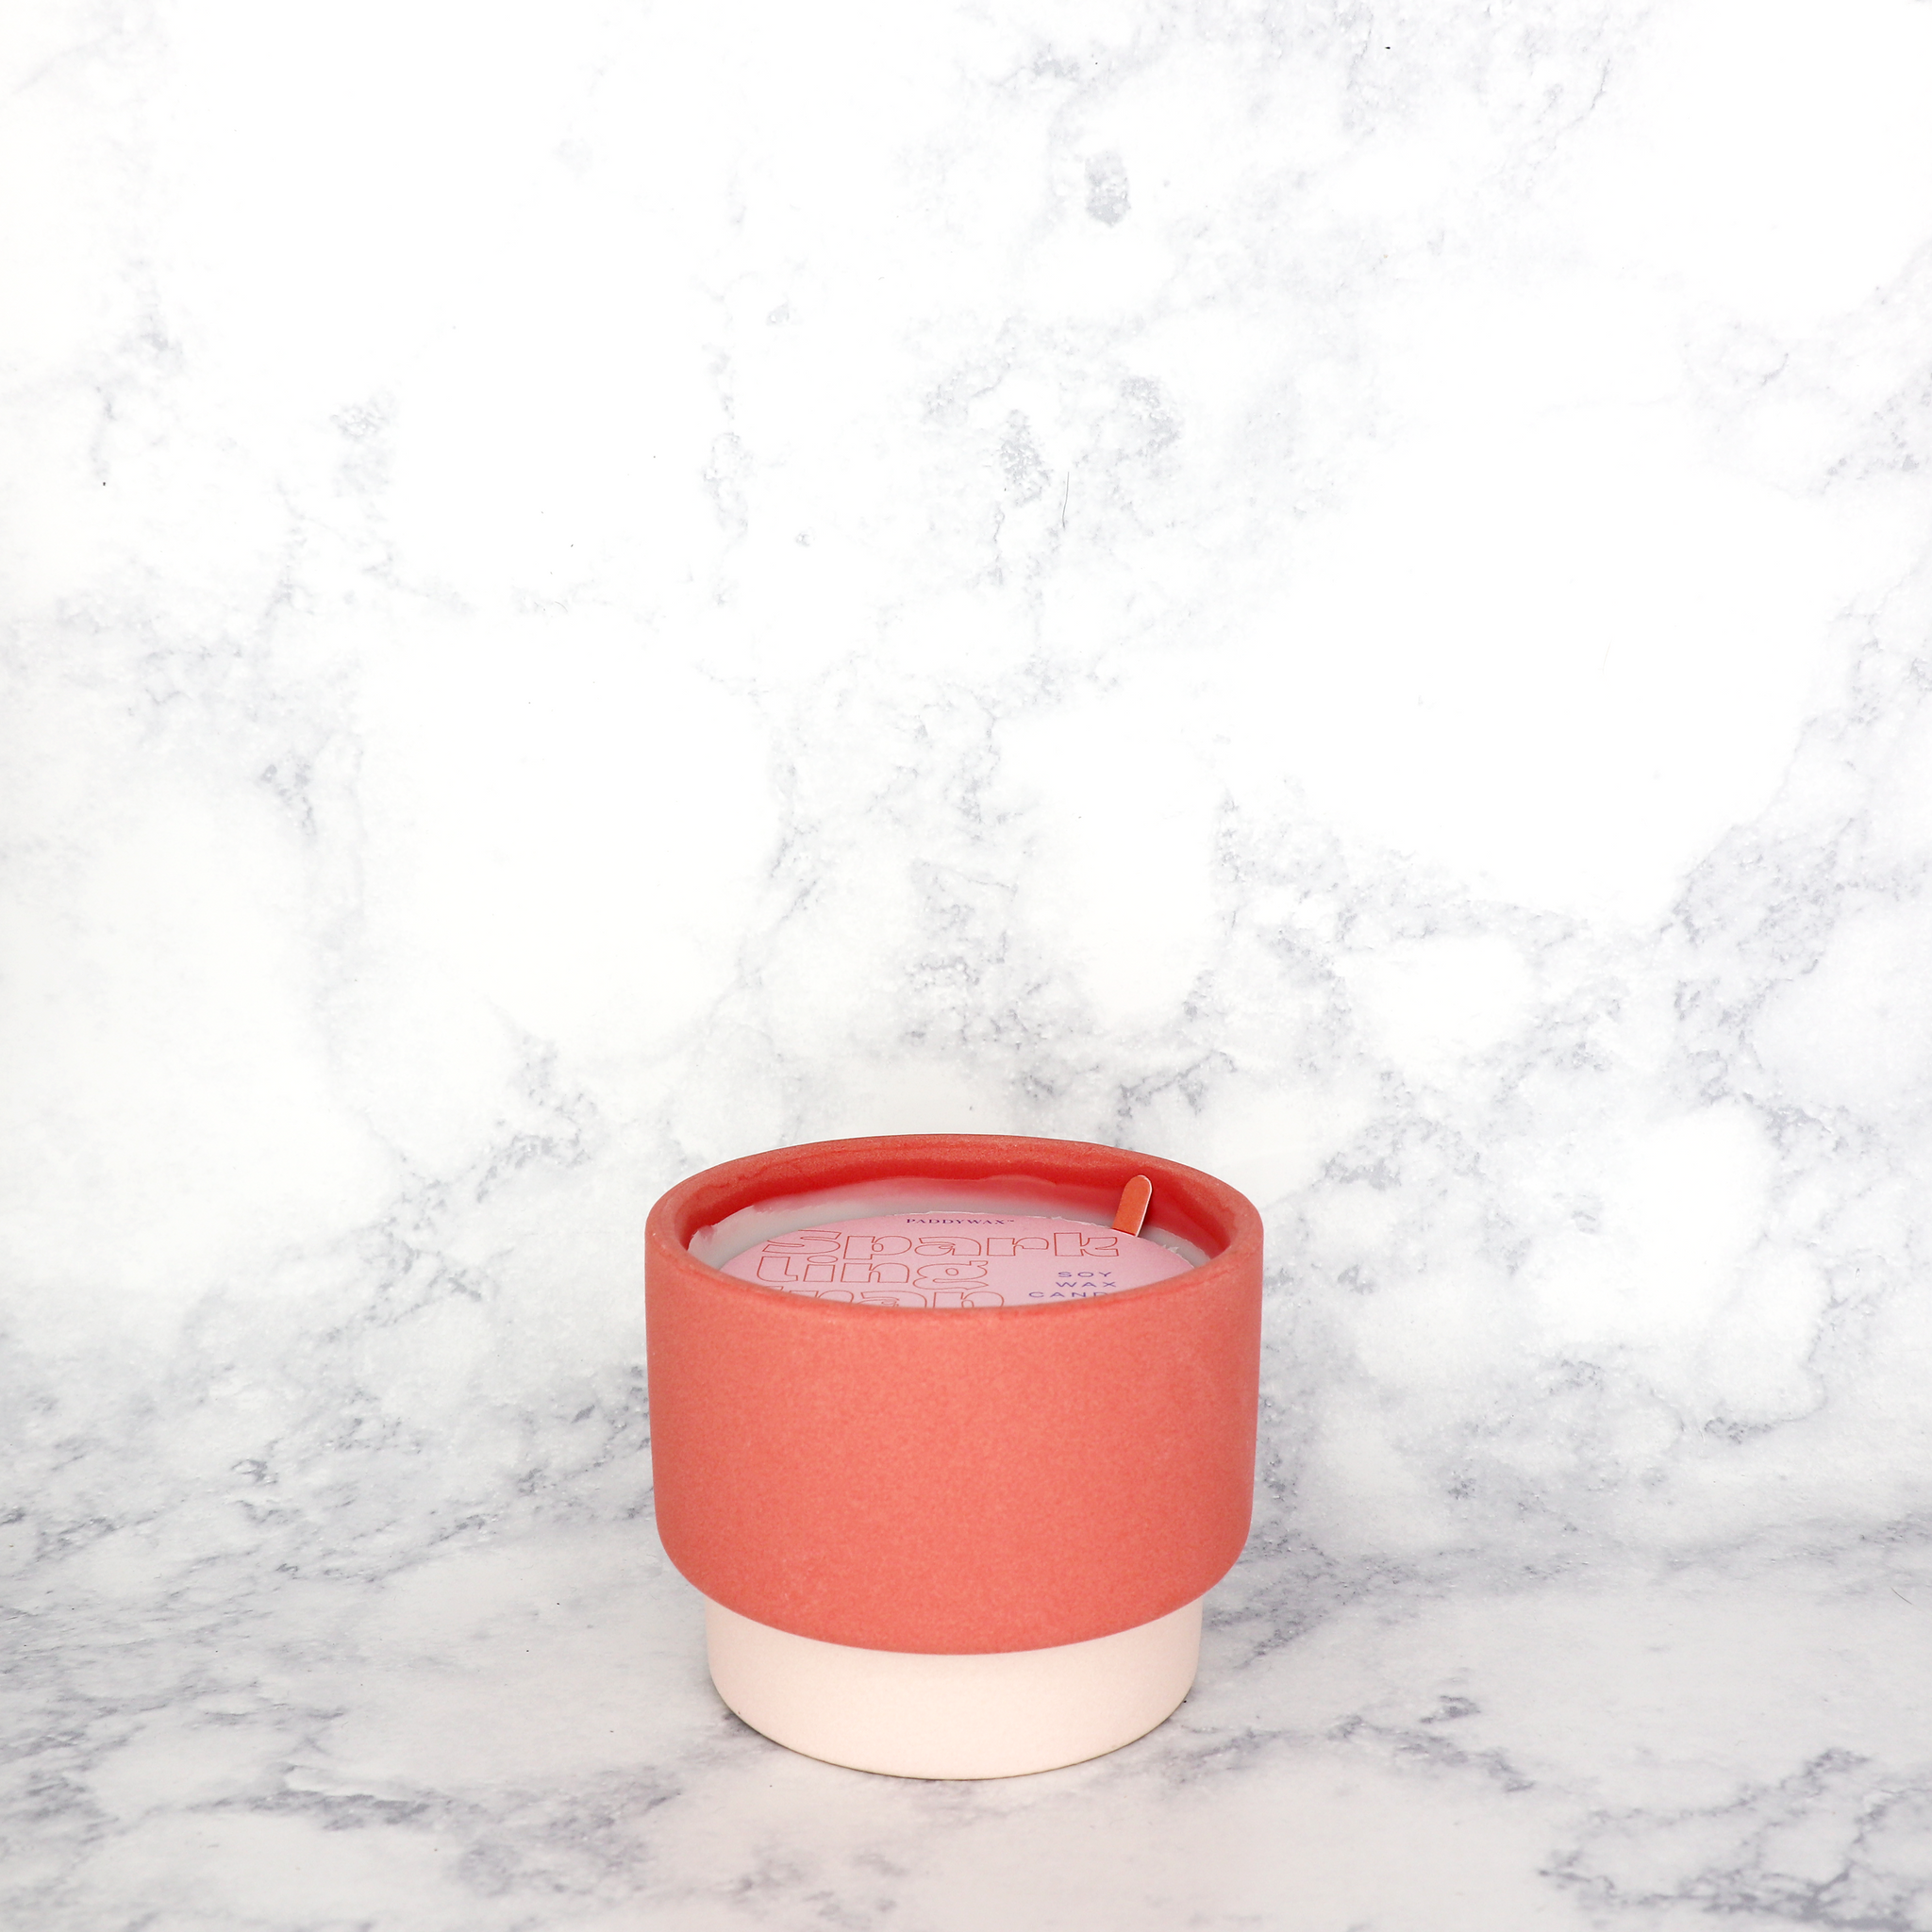 Sparkling Grapefruit Colorblock Ceramic Soy Wax Candle